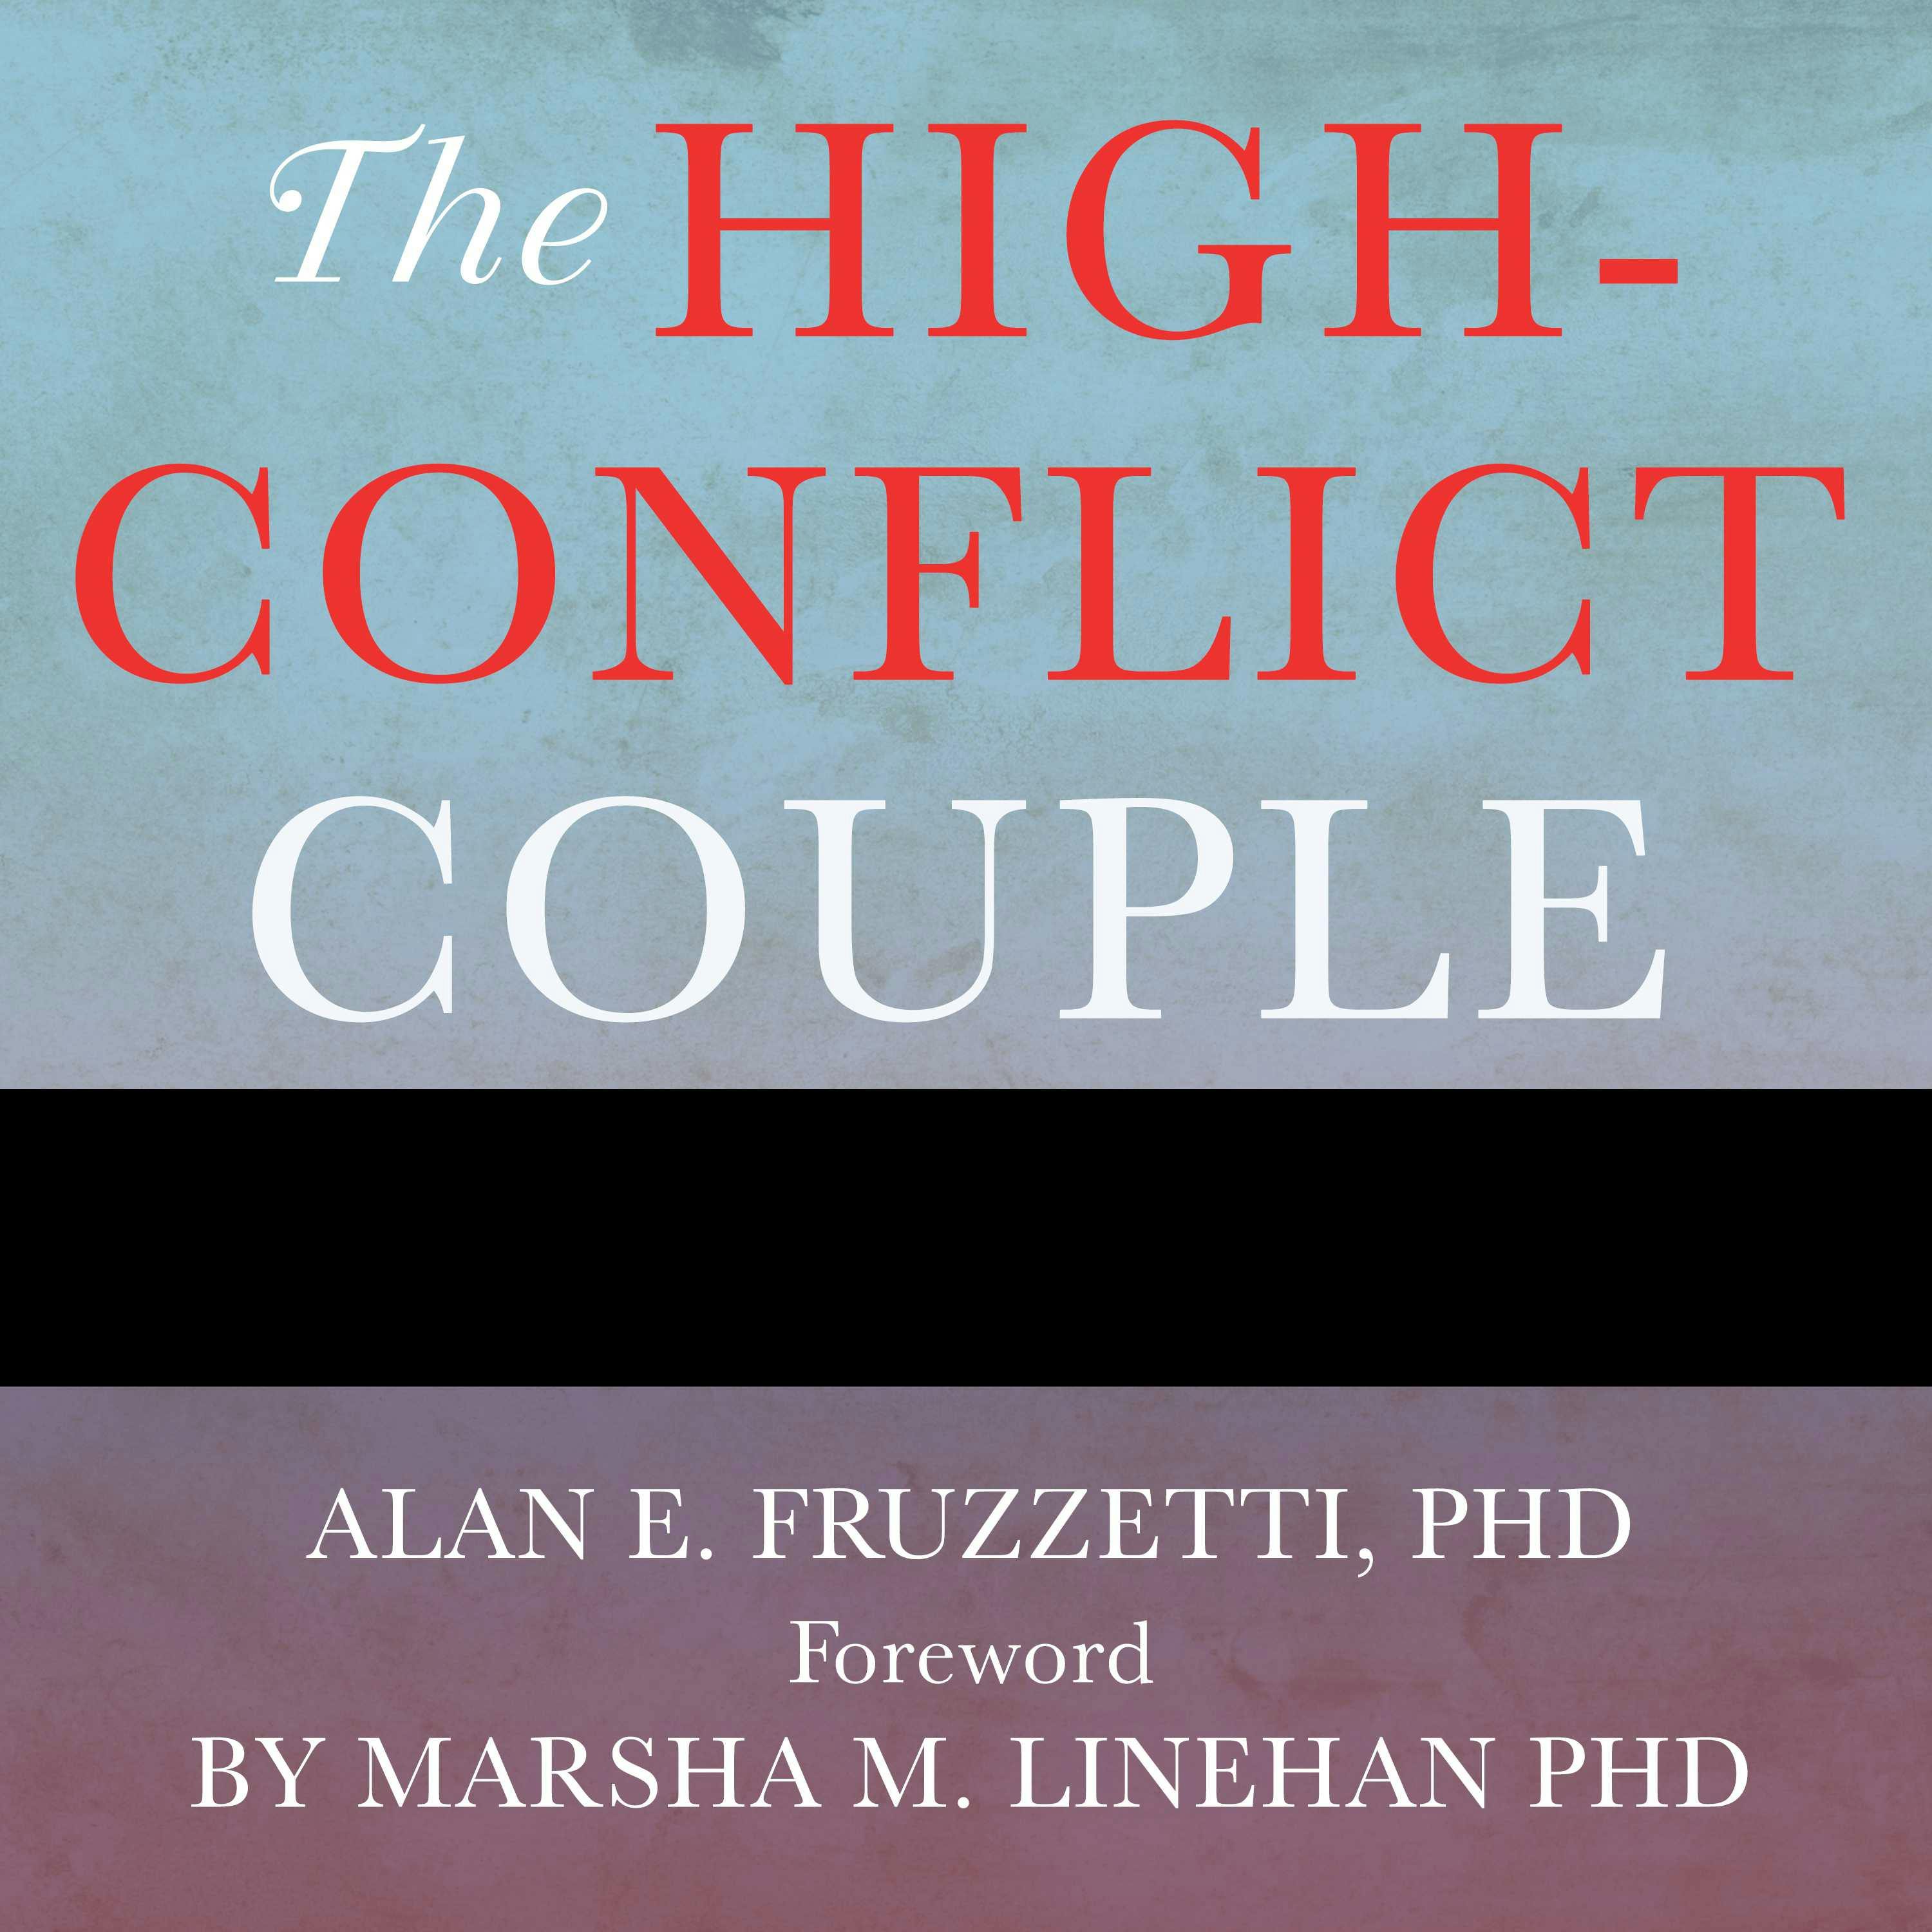 The High-Conflict Couple: A Dialectical Behavior Therapy Guide to Finding Peace, Intimacy, and Validation - Alan E. Fruzzetti, PhD